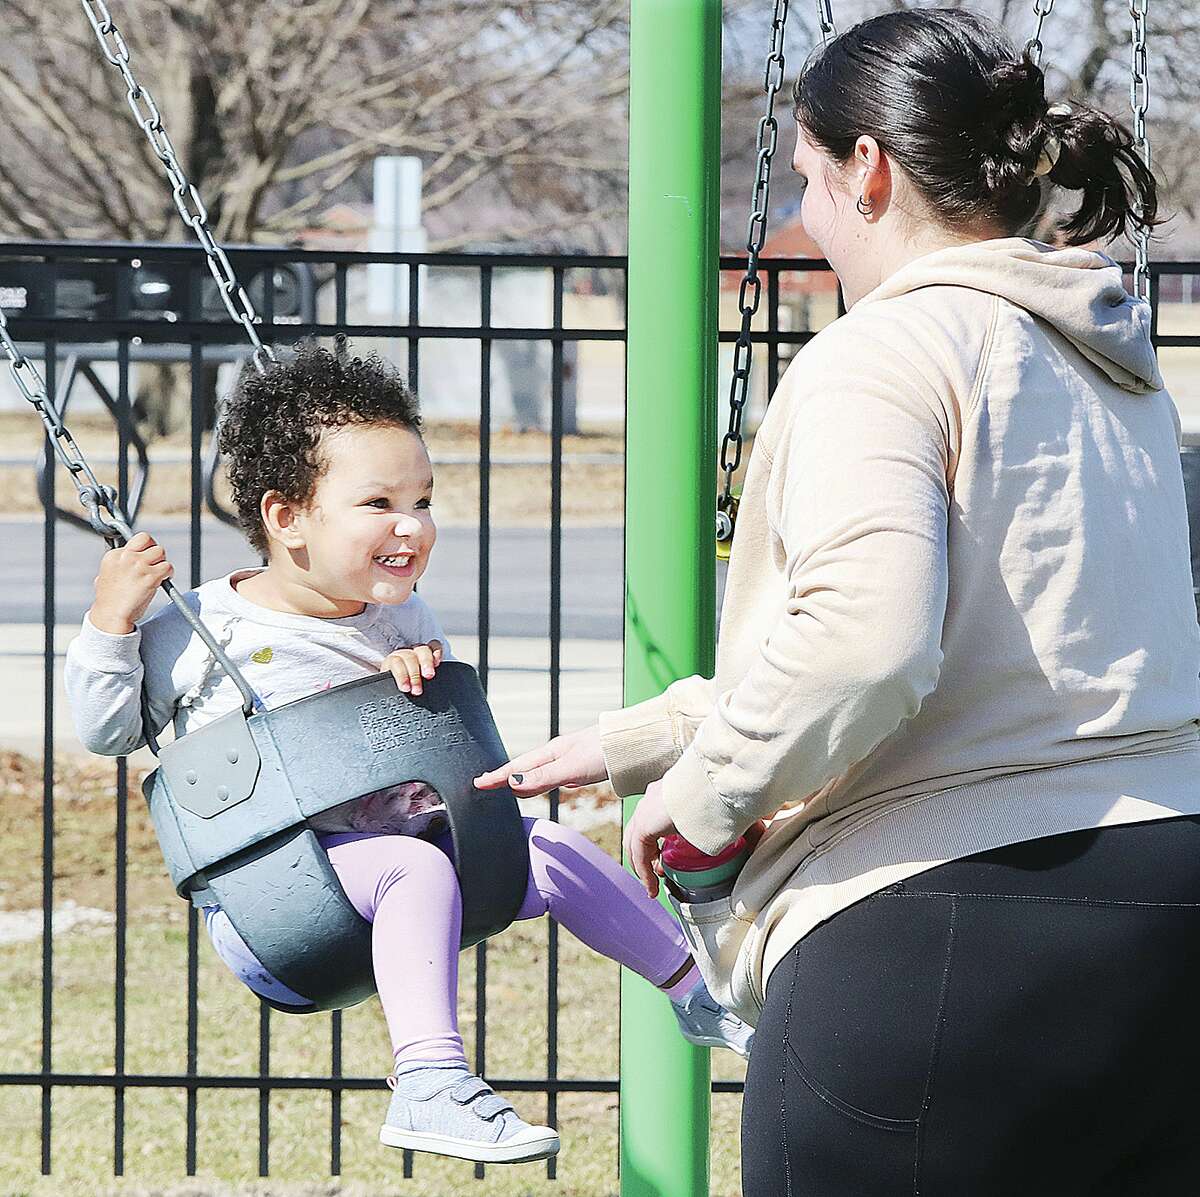 John Badman|The Telegraph It was feeling a lot like spring Monday as temperatures hit 60 degrees, bringing people outdoors for some much needed fresh air. Skylynn, 2, of Alton, was all smiles as her mother gave her pushes in the swing at Alton's Gordon Moore Park. Temperatures will be in the mid 60s Tuesday and near 70 degrees on Wednesday.